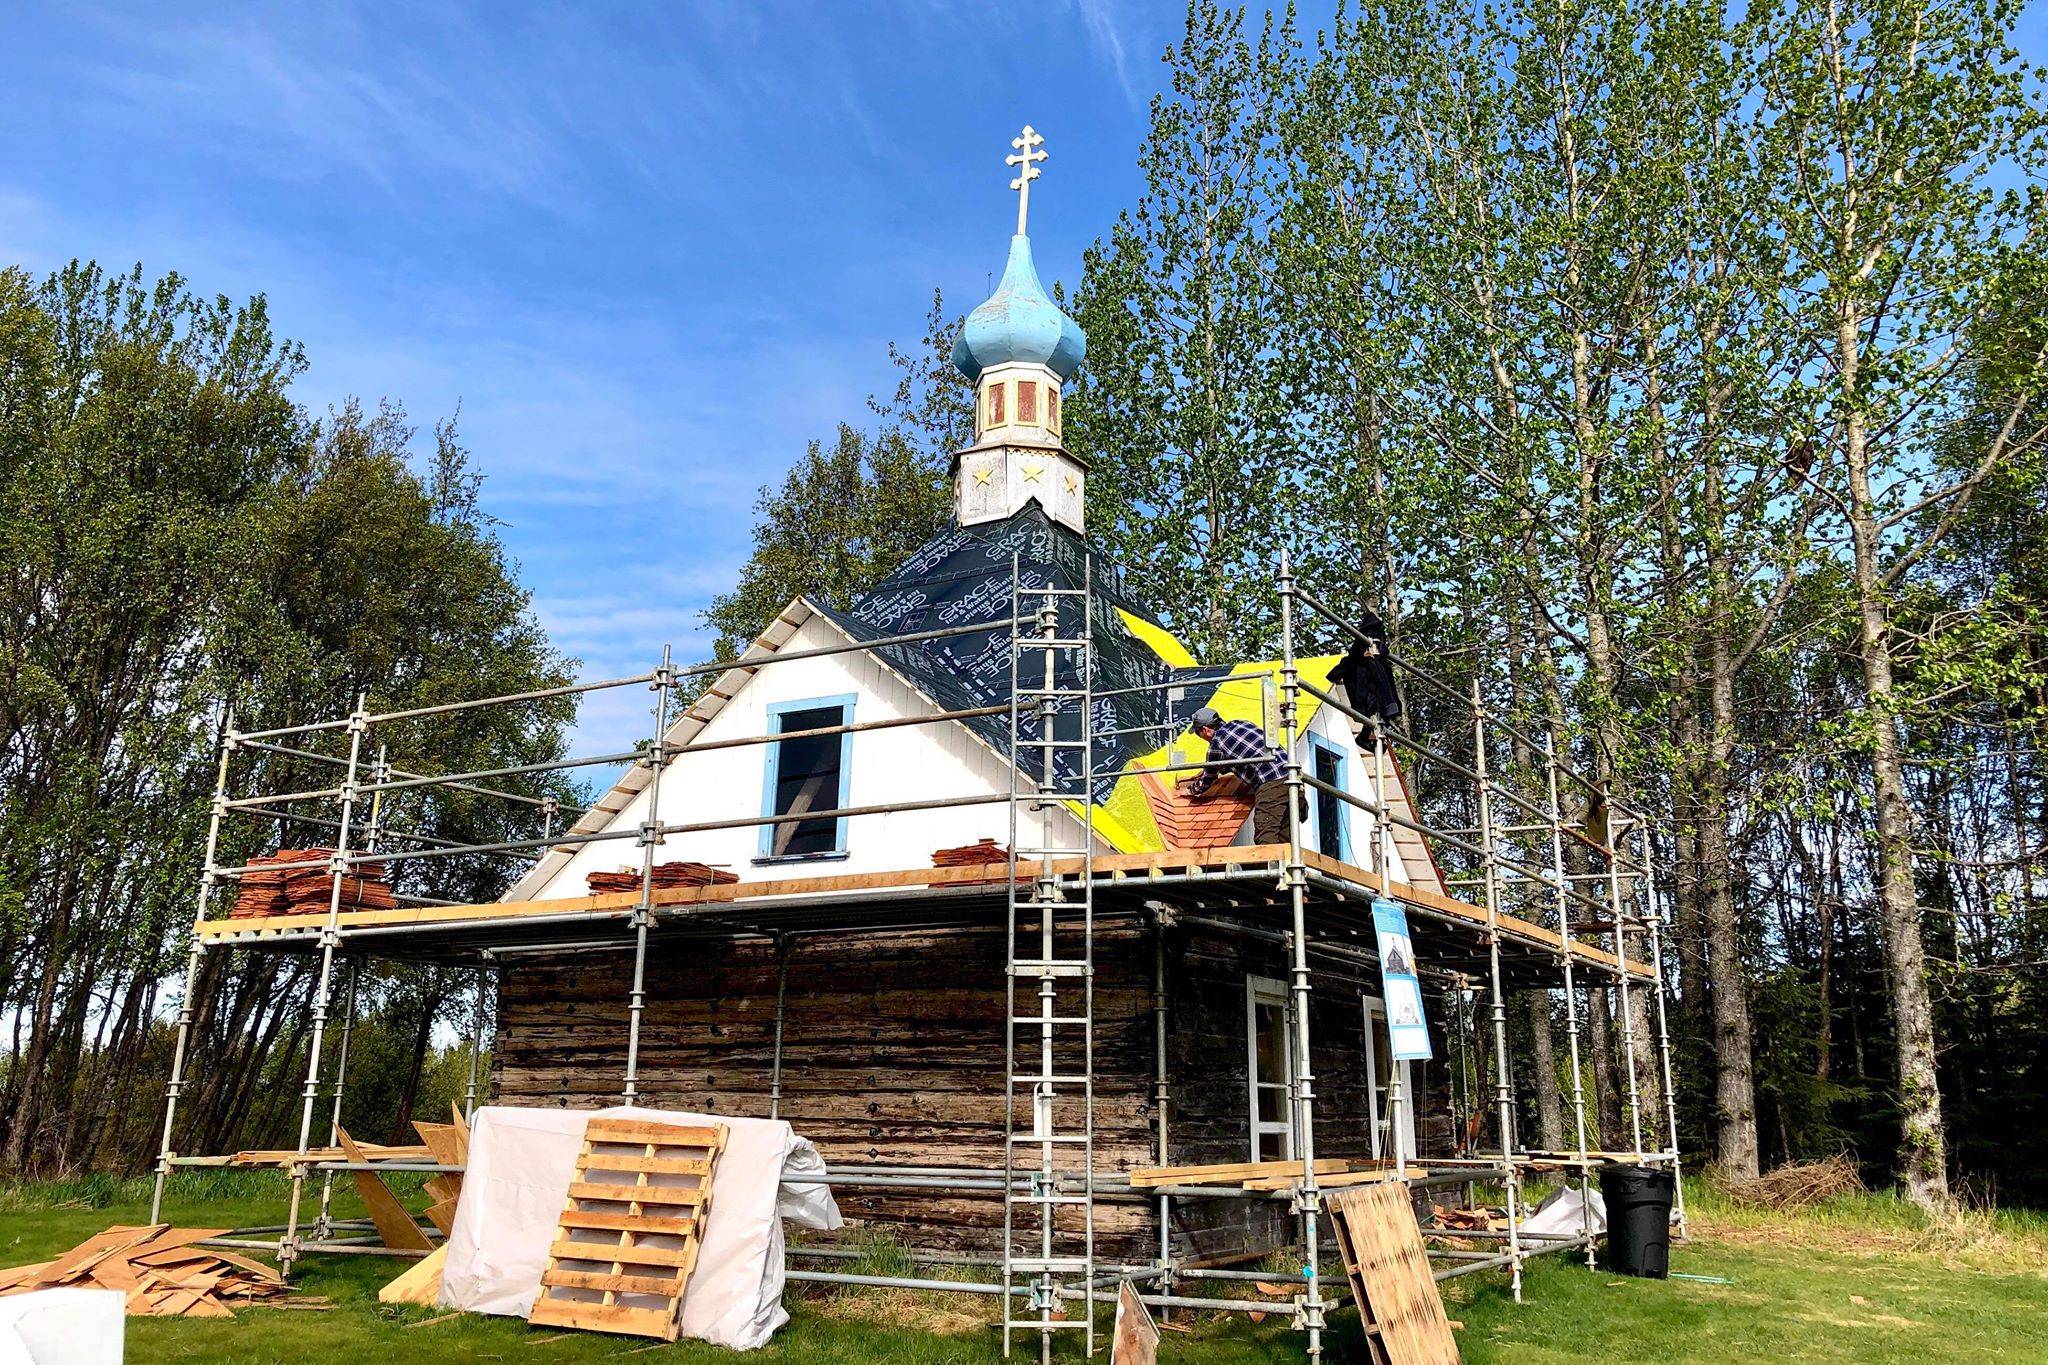 John Wachtel, a former National Parks Service employee, places new cedar shingles on the roof of the Saint Nicholas Memorial Chapel as part of new restorative efforts, on Tuesday, May 21, 2019, in Old Town Kenai, Alaska. (Photo by Victoria Petersen/Peninsula Clarion)